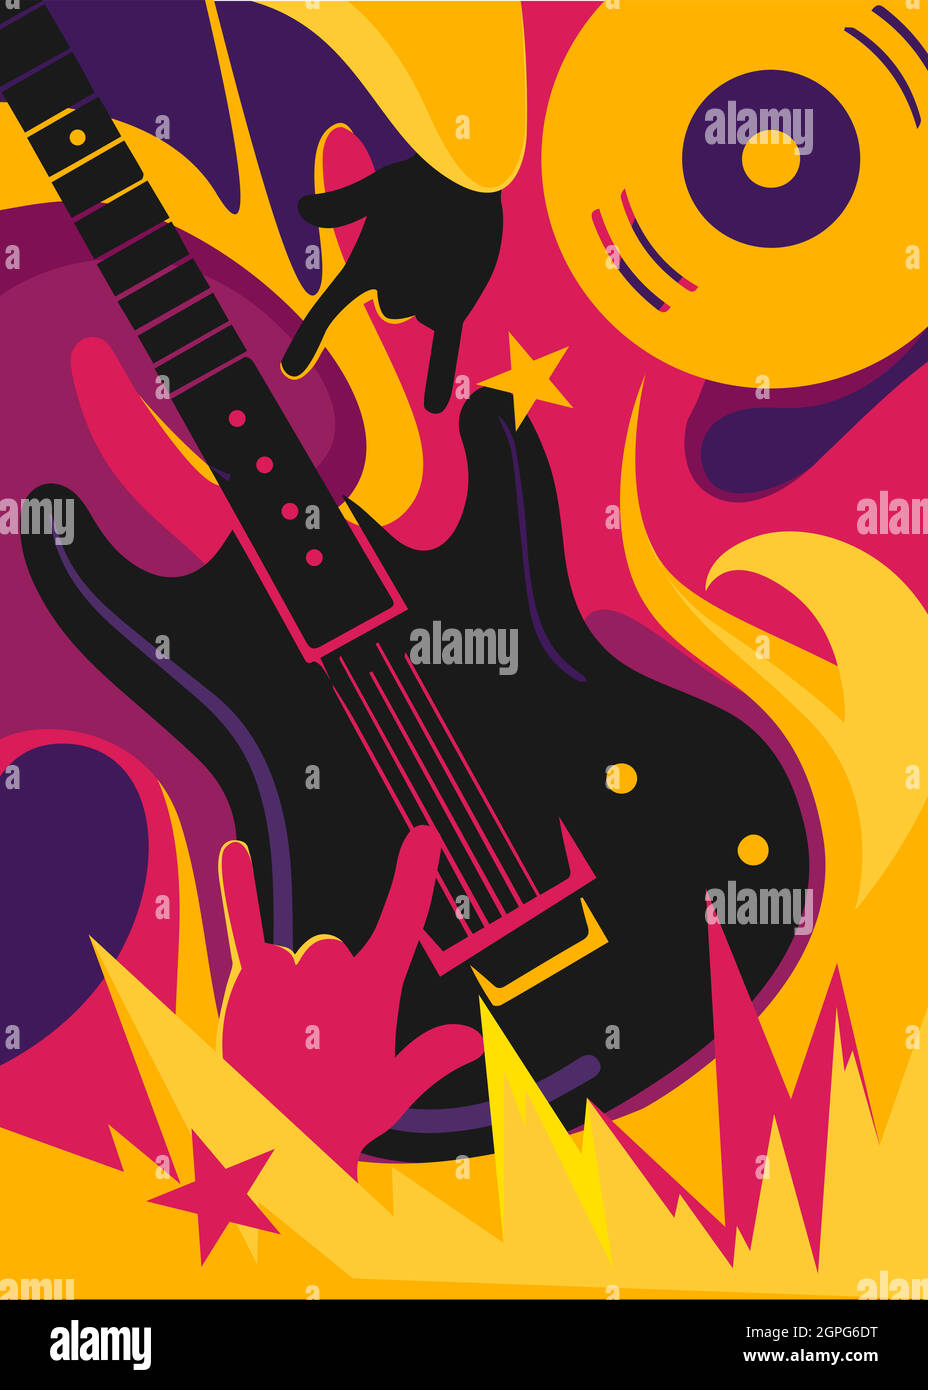 Rock music poster with electric guitar. Placard design in flat style. Stock Vector